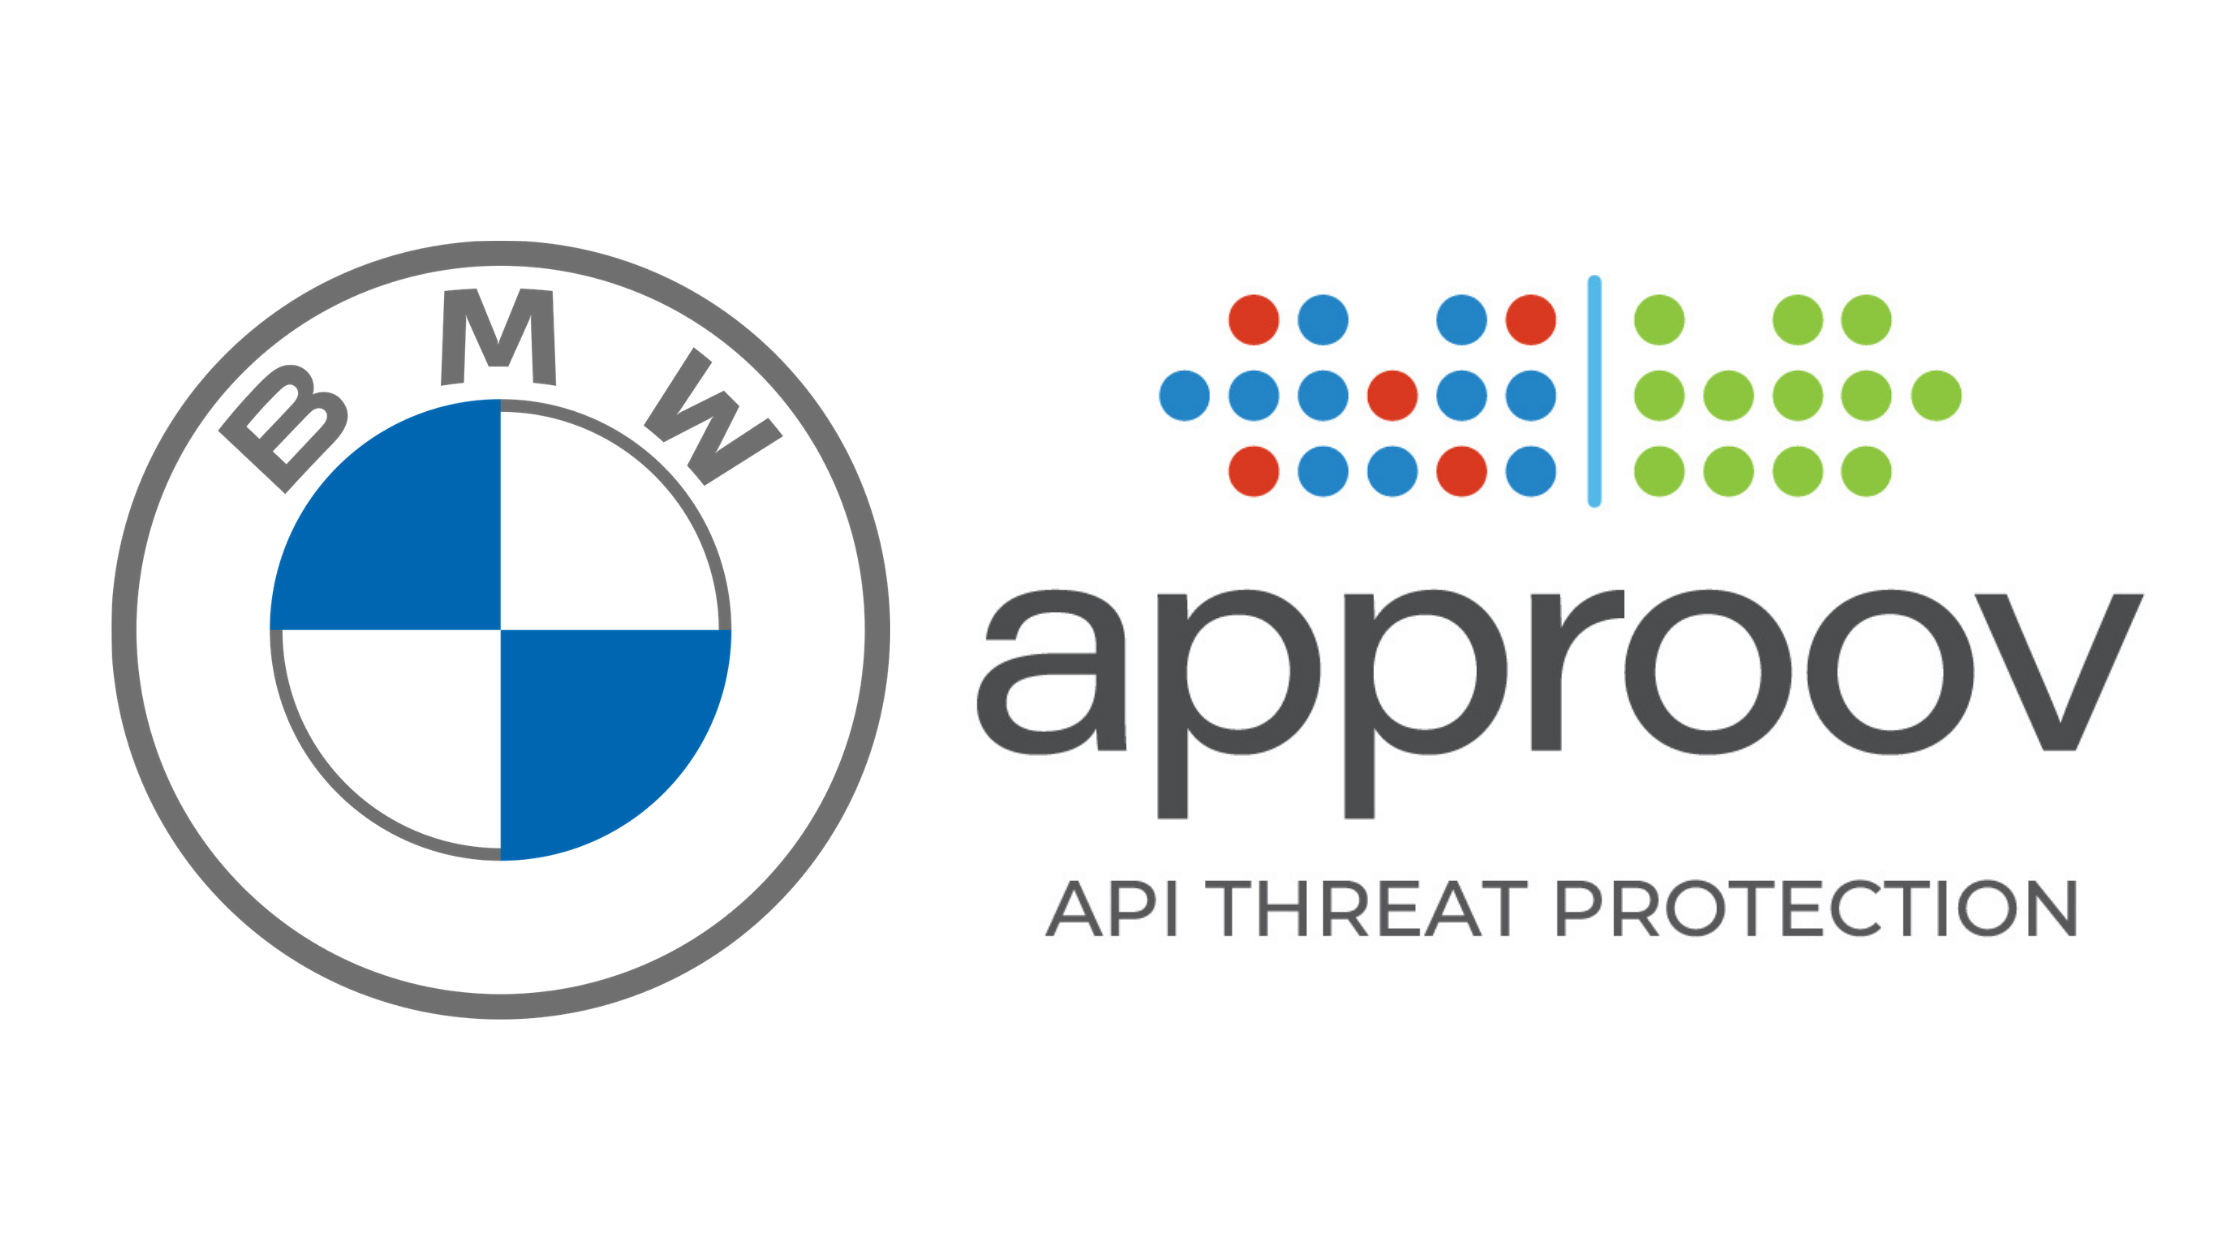 BMW  and Approov API Threat Protection logos on white background